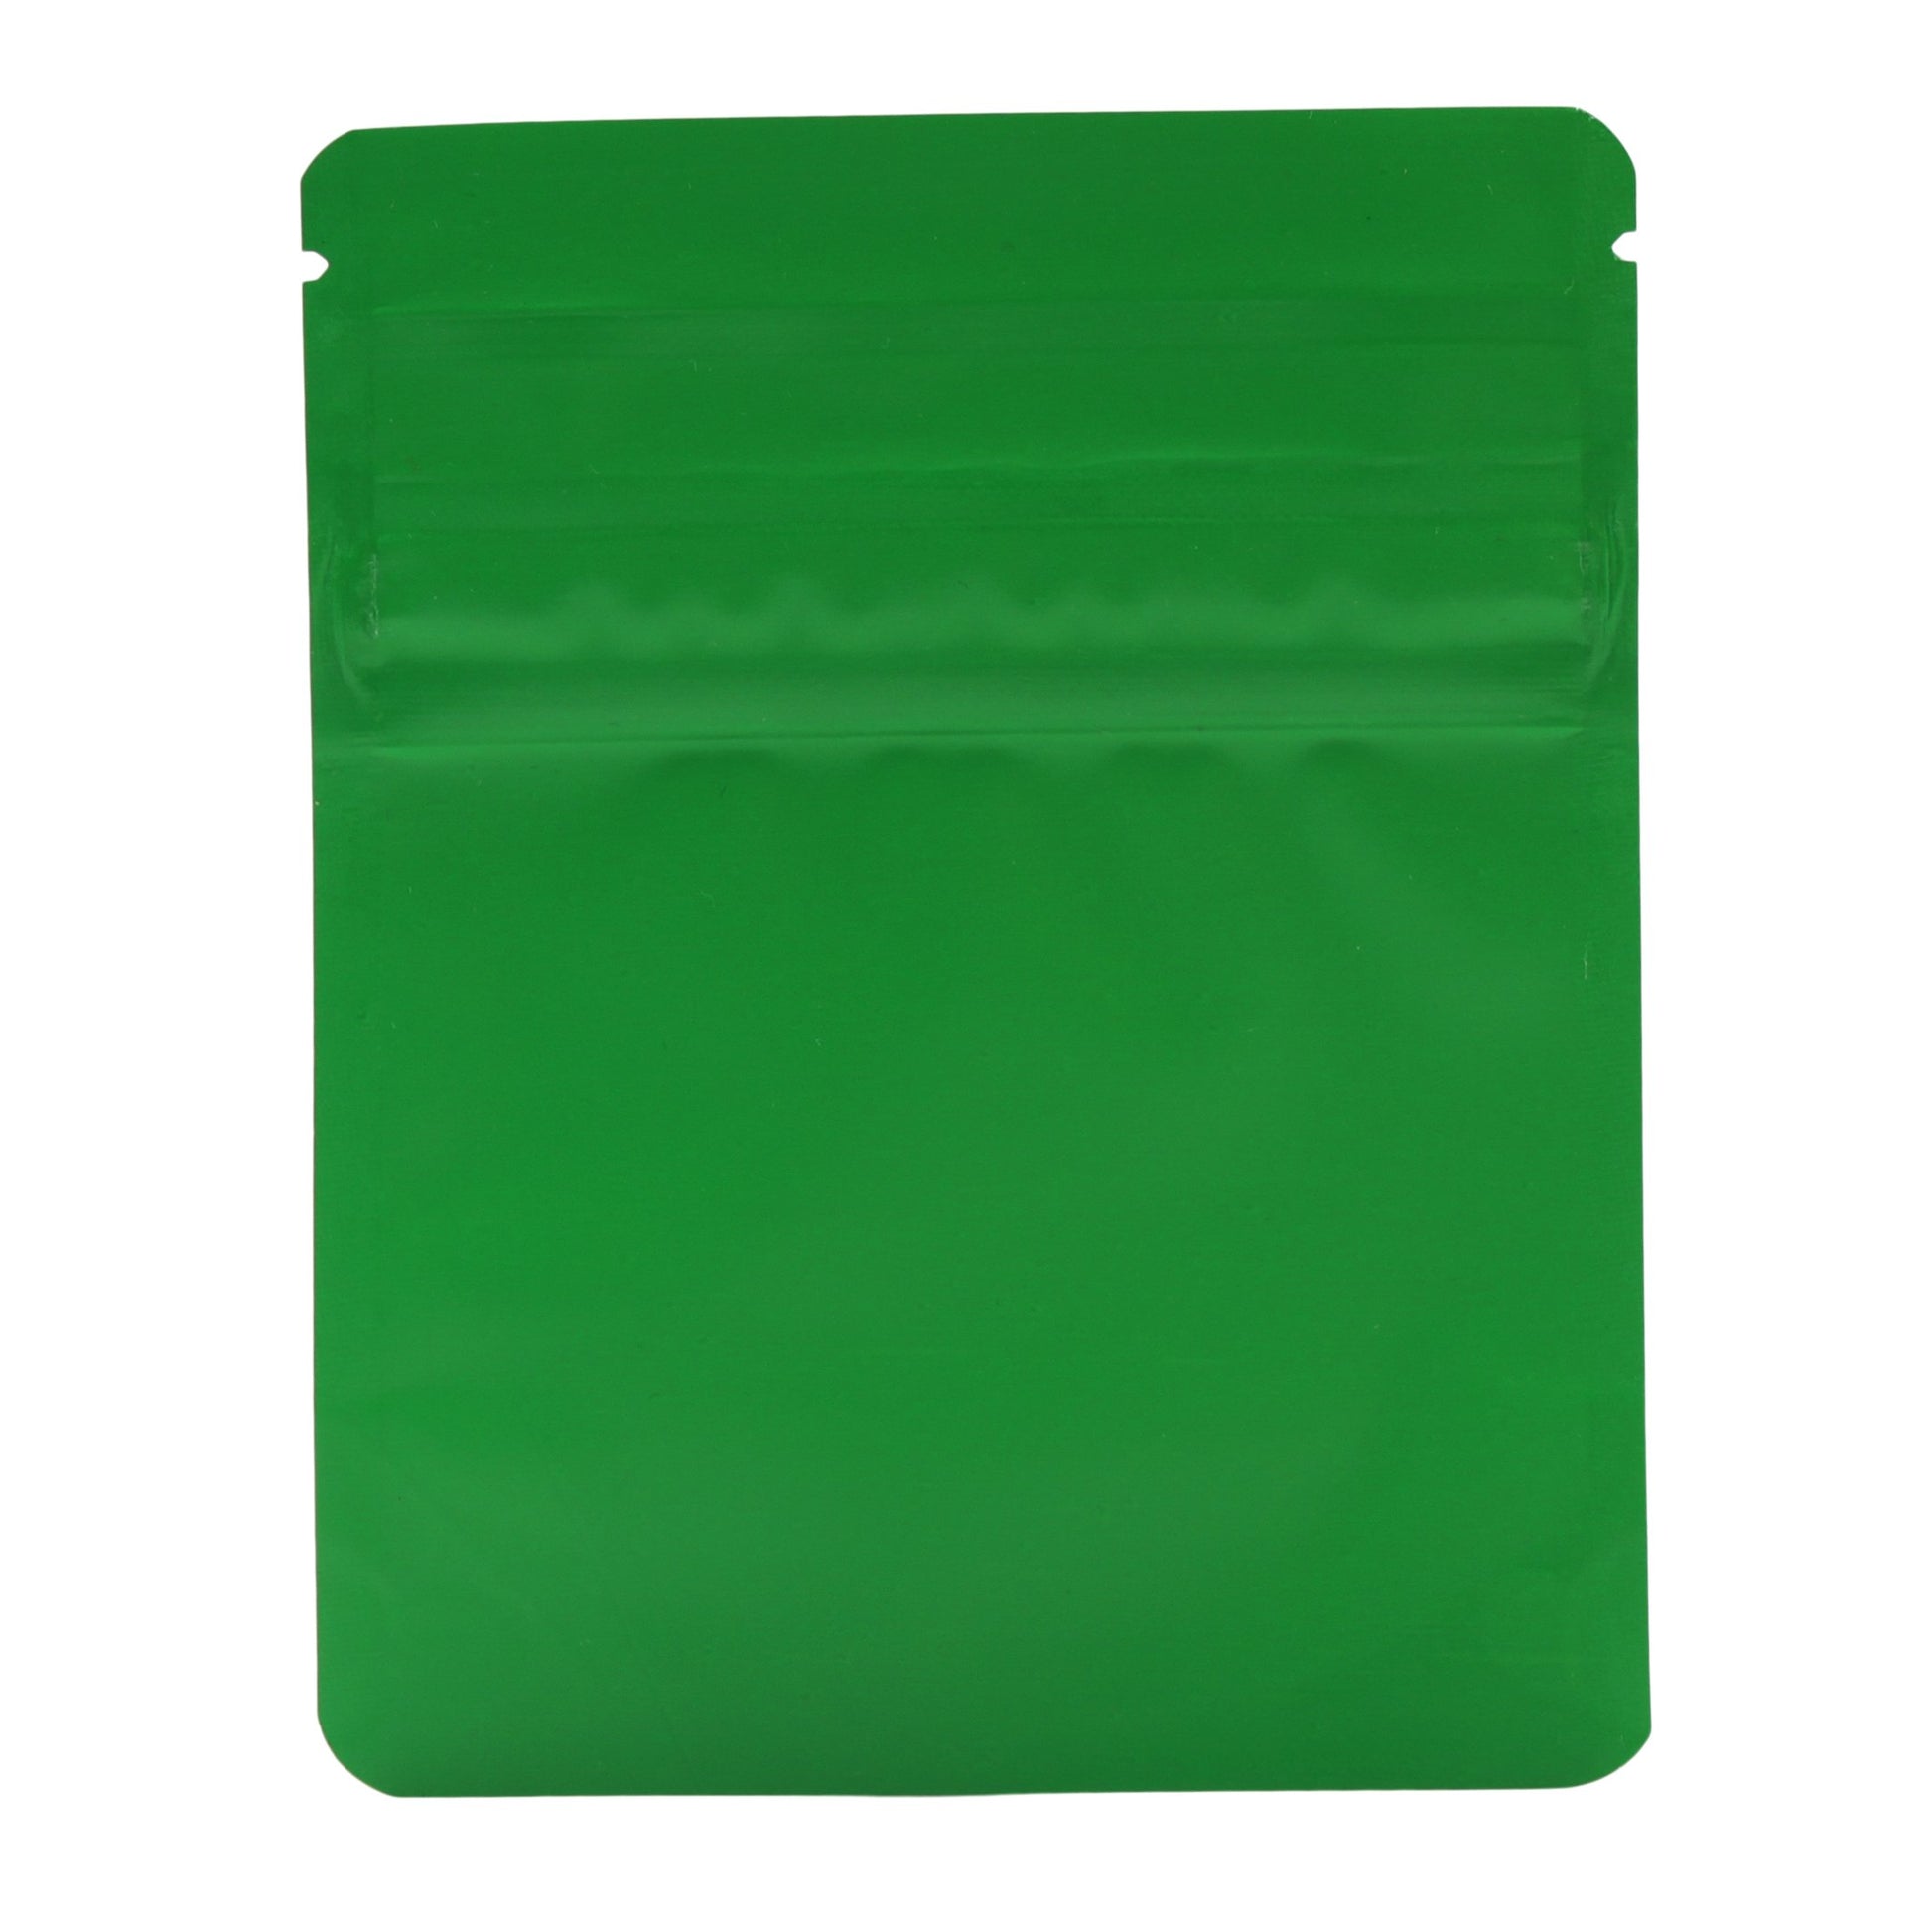 Bag King Child-Resistant Opaque Wide Mouth Bag (1/8th oz) 3.9" x 4.9" Matte Green